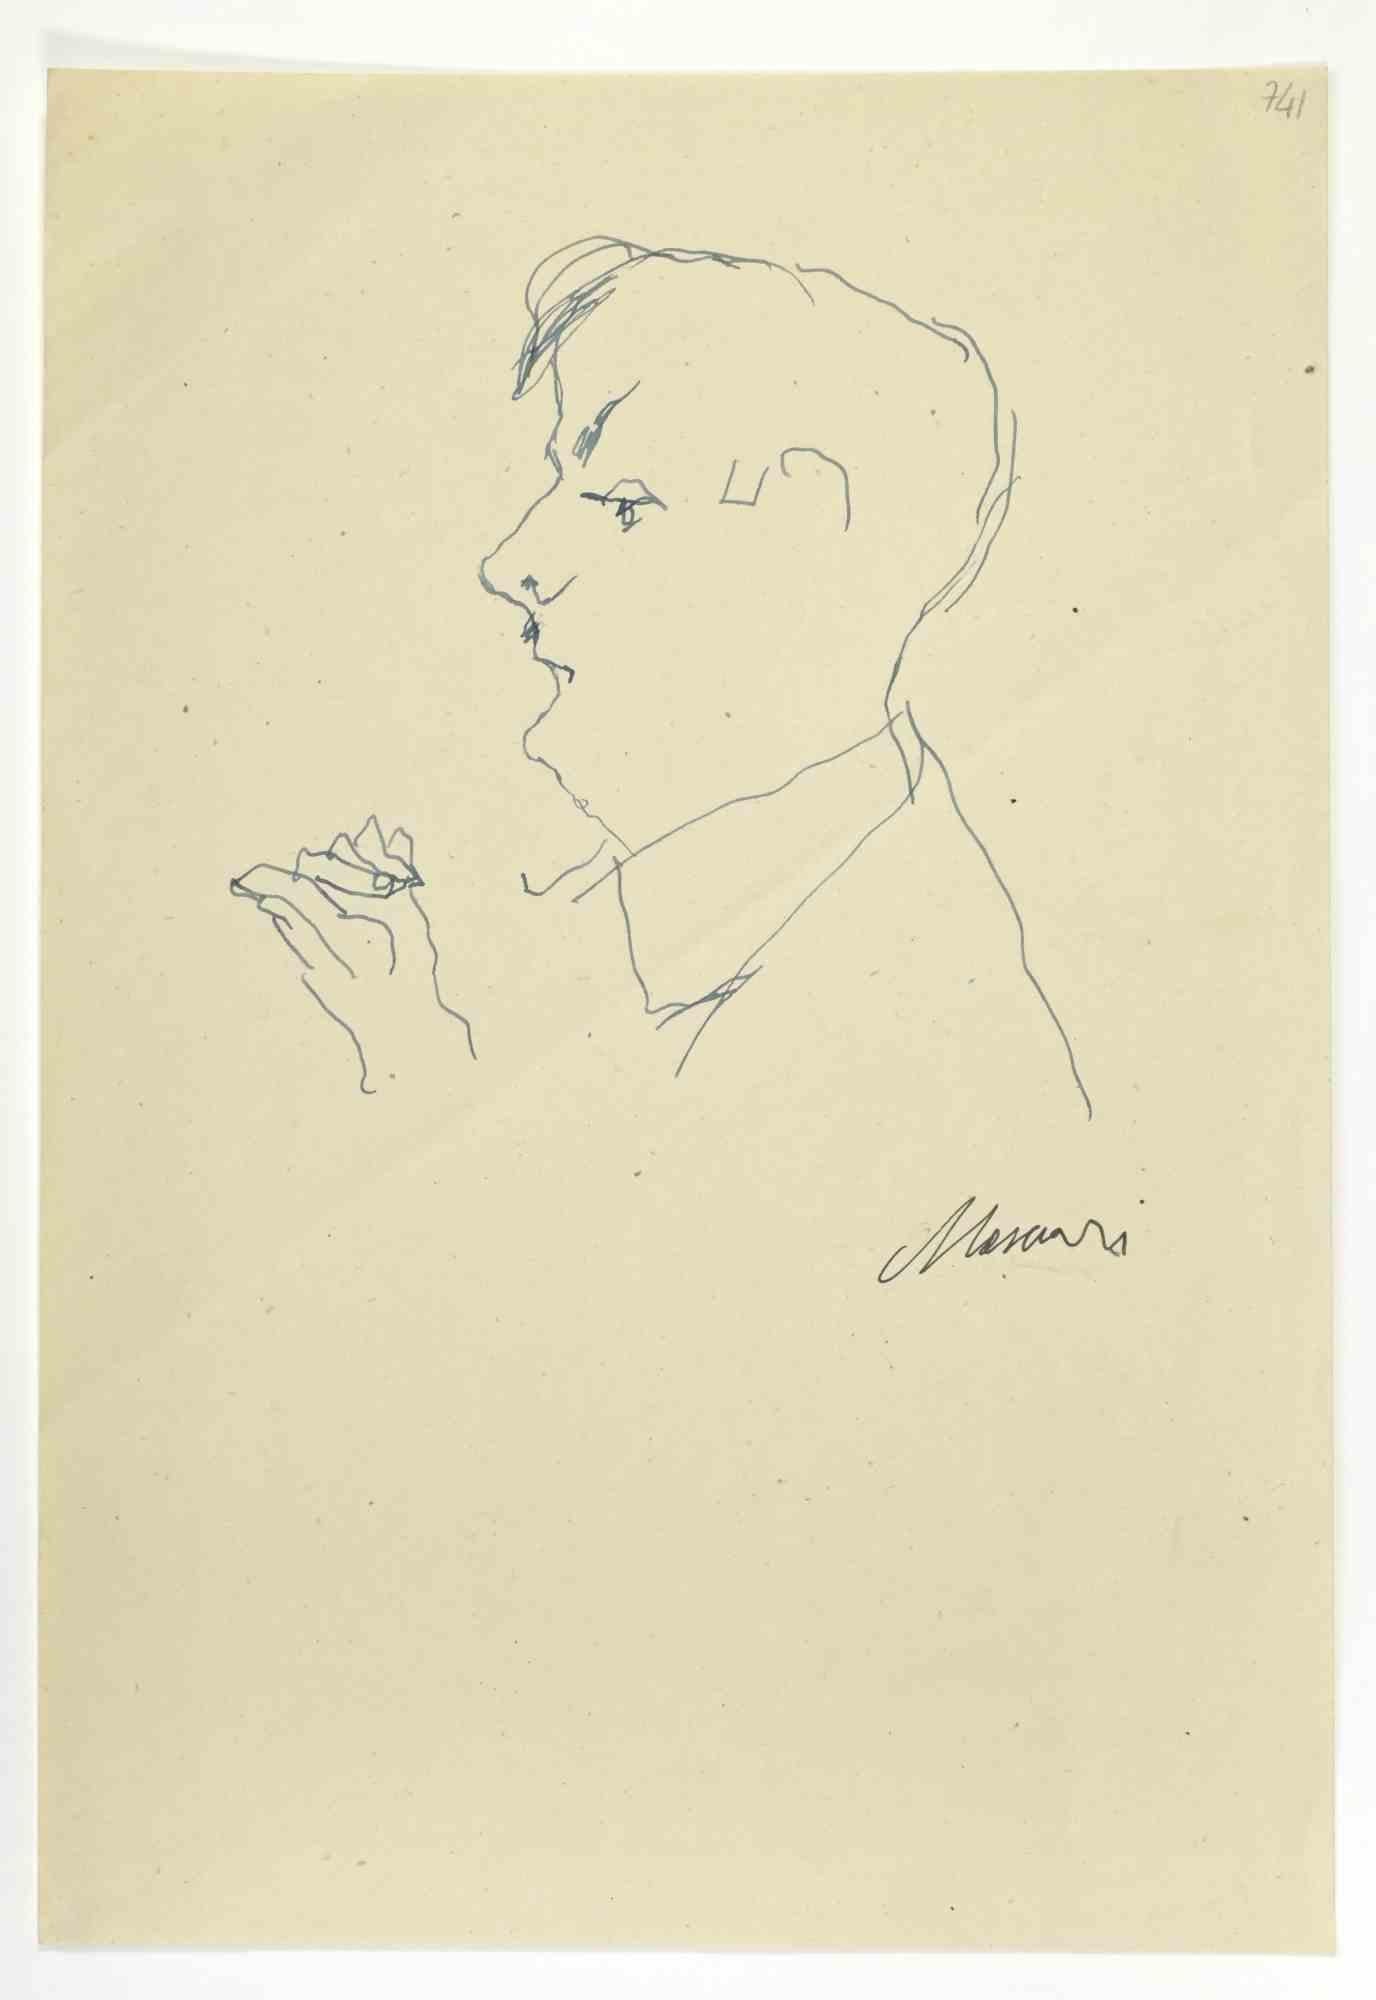 Profile is a Pen Drawing realized by Mino Maccari  (1924-1989) in the 1960s.

Hand-signed on the lower.

Good condition.

Mino Maccari (Siena, 1924-Rome, June 16, 1989) was an Italian writer, painter, engraver and journalist, winner of the